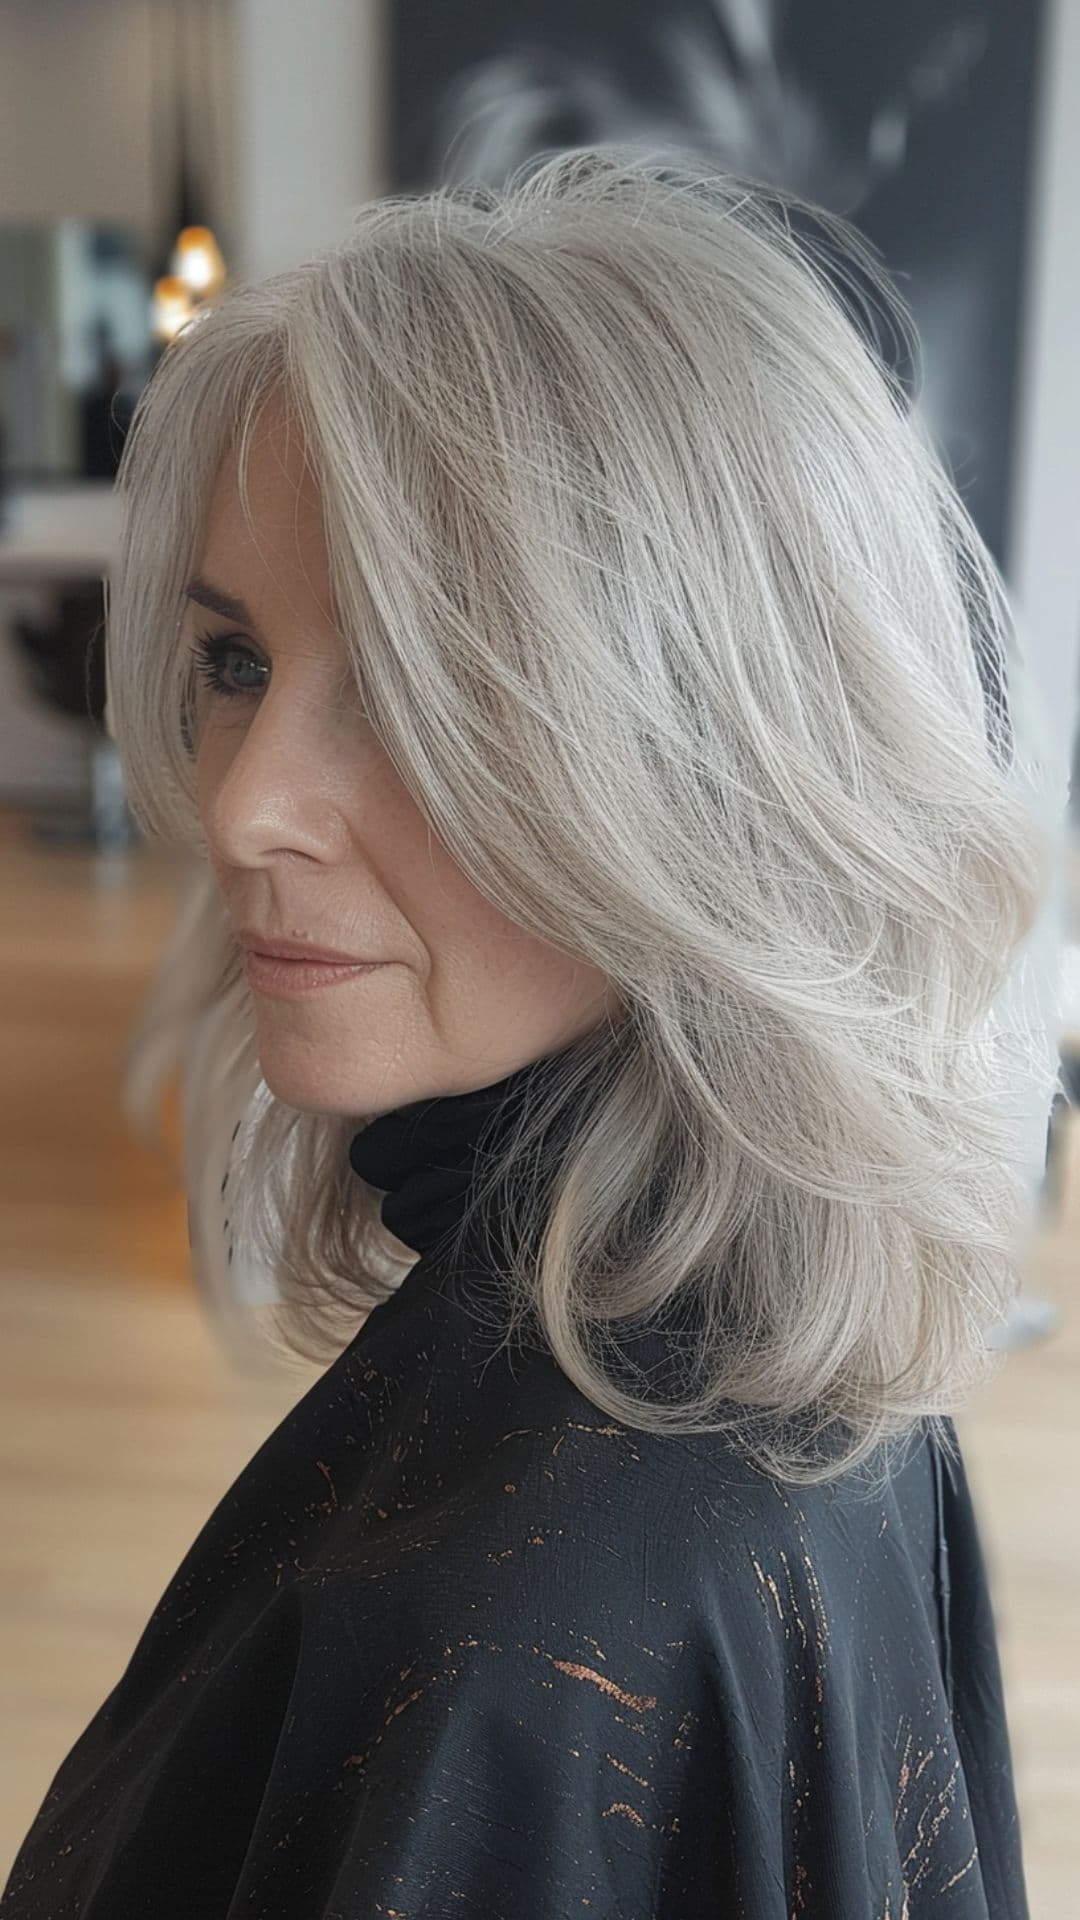 An old woman modelling a soft silver hair.